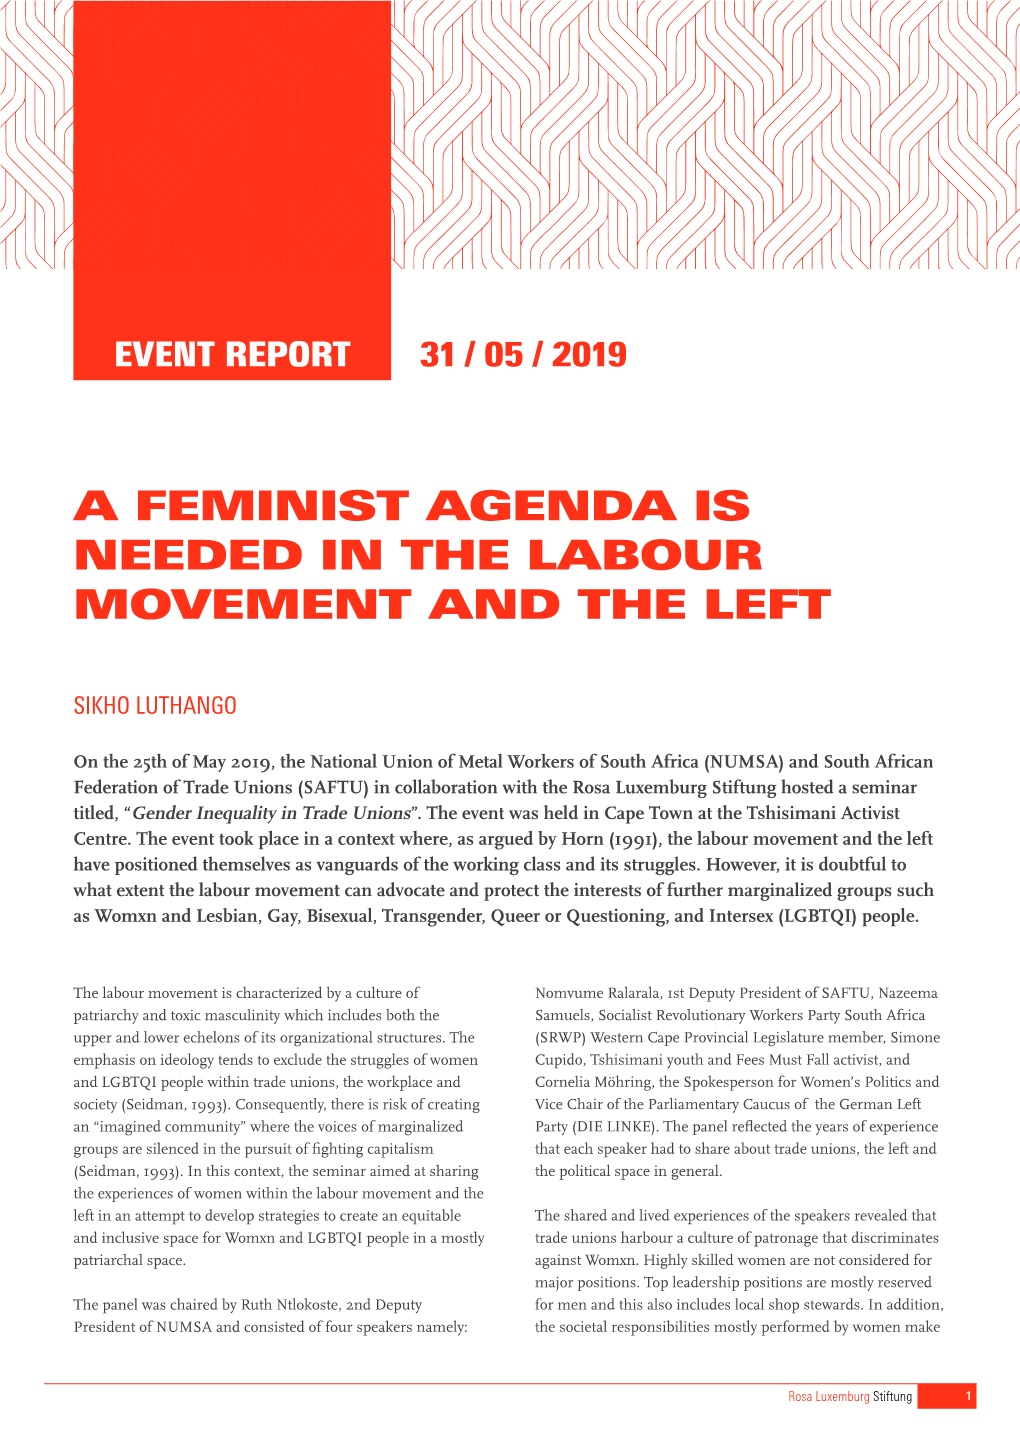 A Feminist Agenda Is Needed in the Labour Movement and the Left